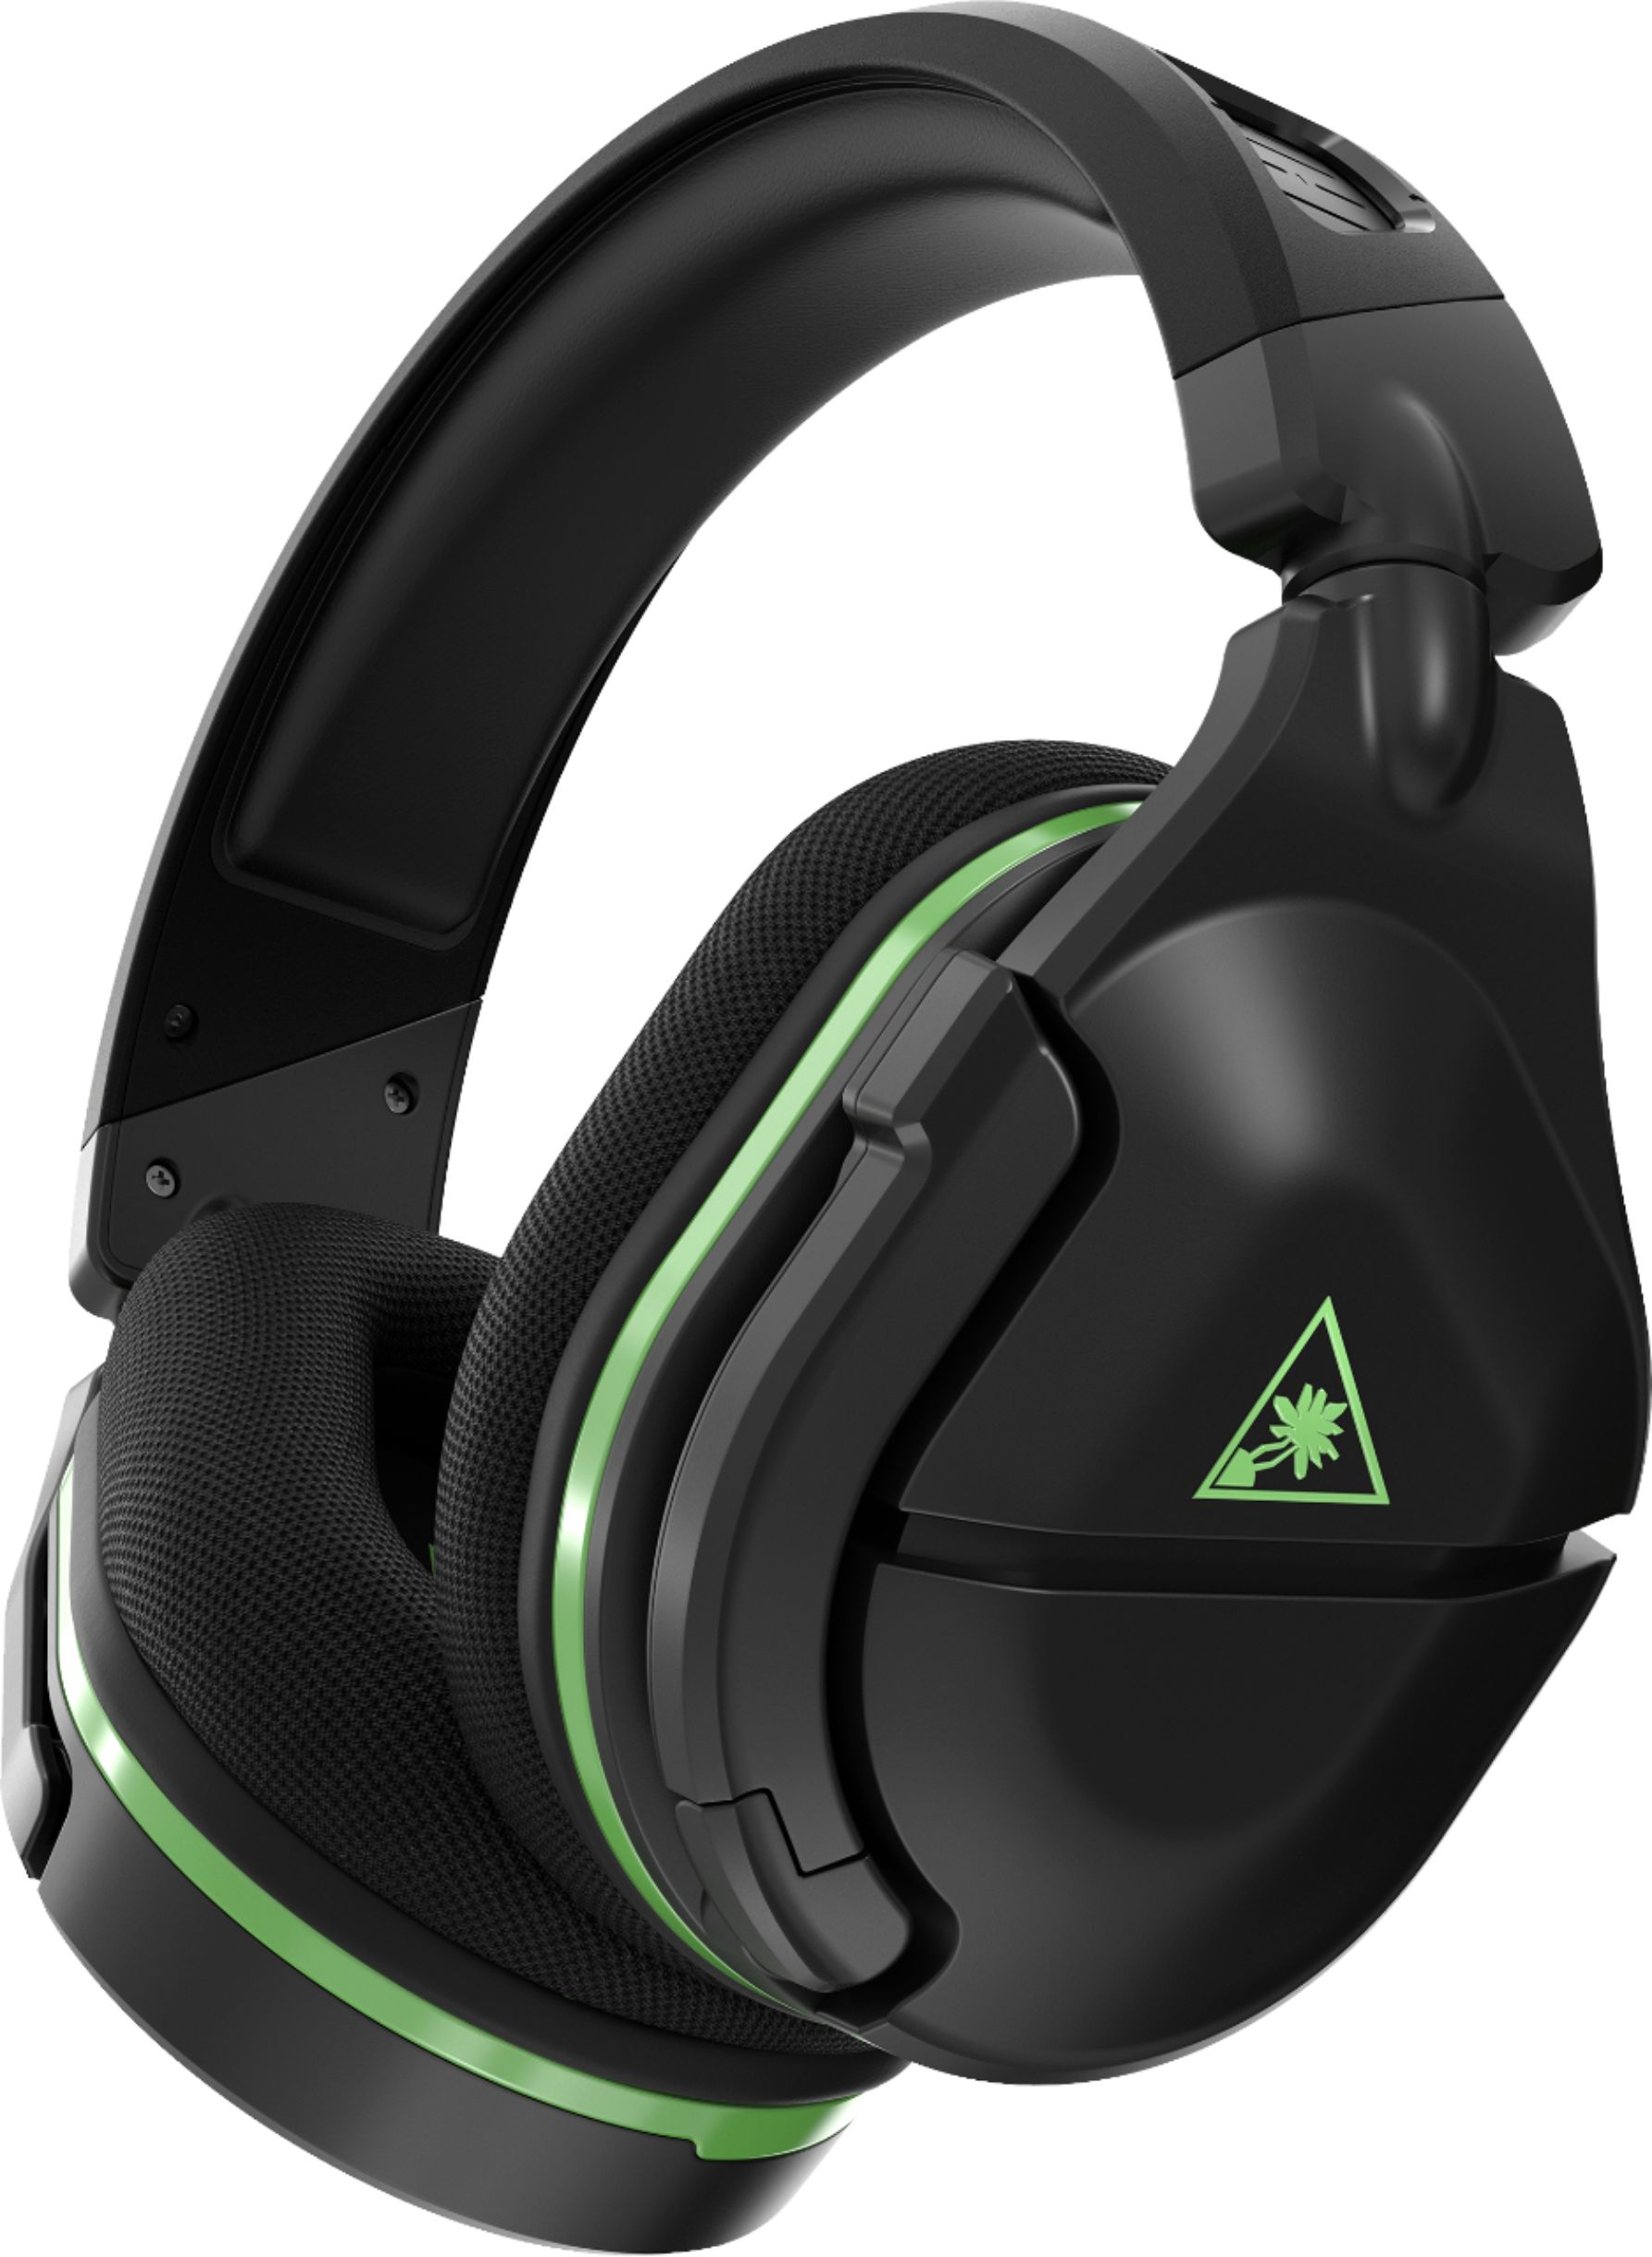 best wireless gaming headset for xbox one x